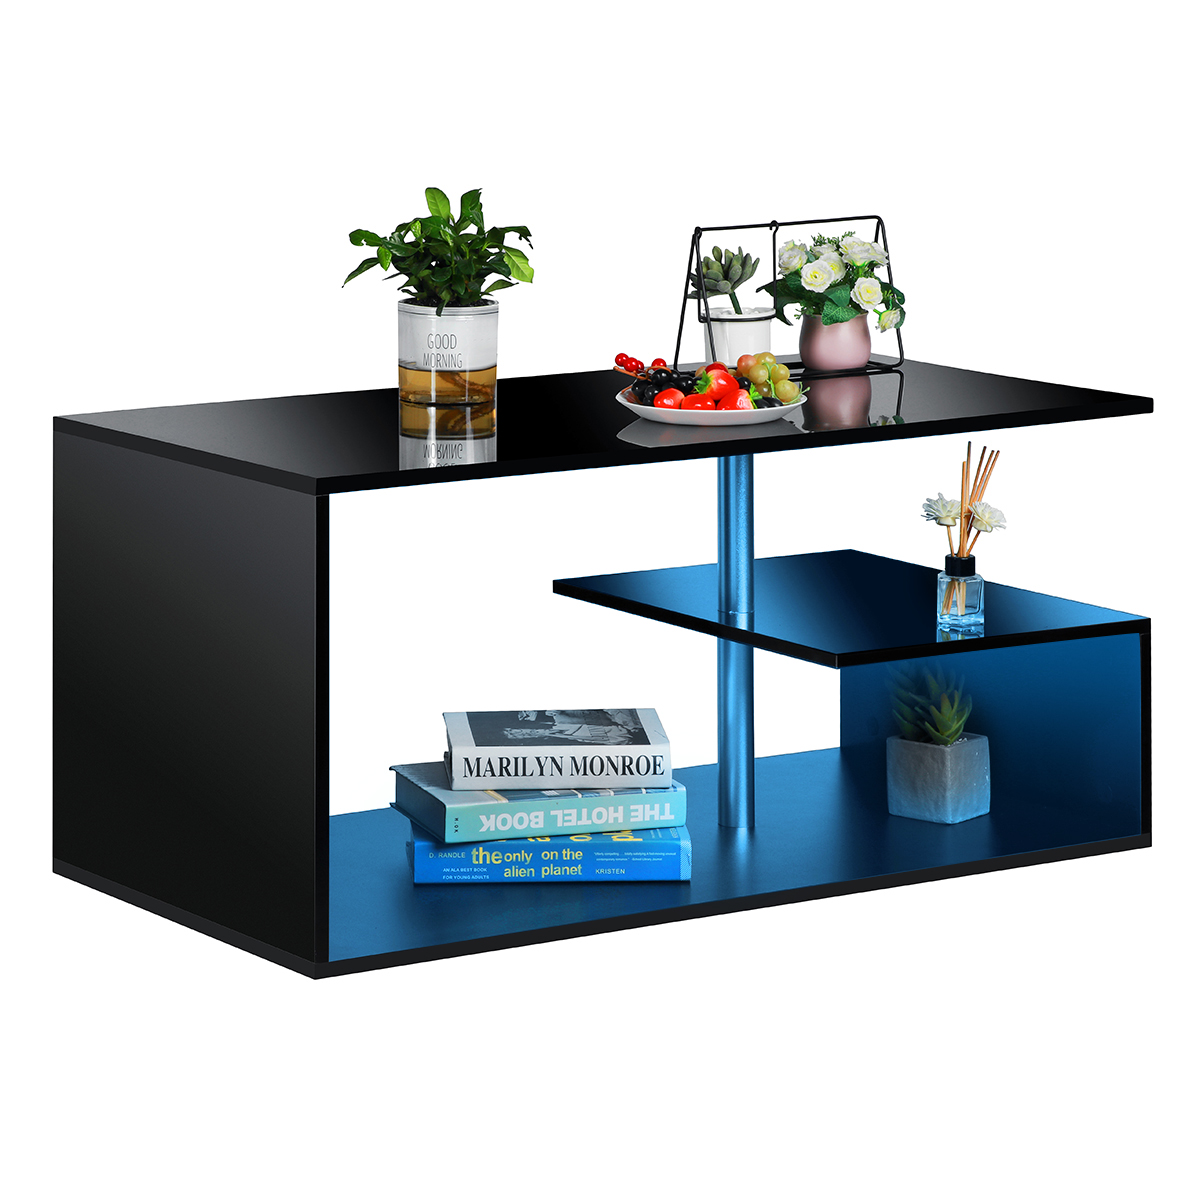 Hommpa High Gloss Coffee Table with Open Shelf LED Lights Smart APP Control Black Center Sofa End Table S Shaped Modern Cocktail Tables with for Living Room - image 4 of 12